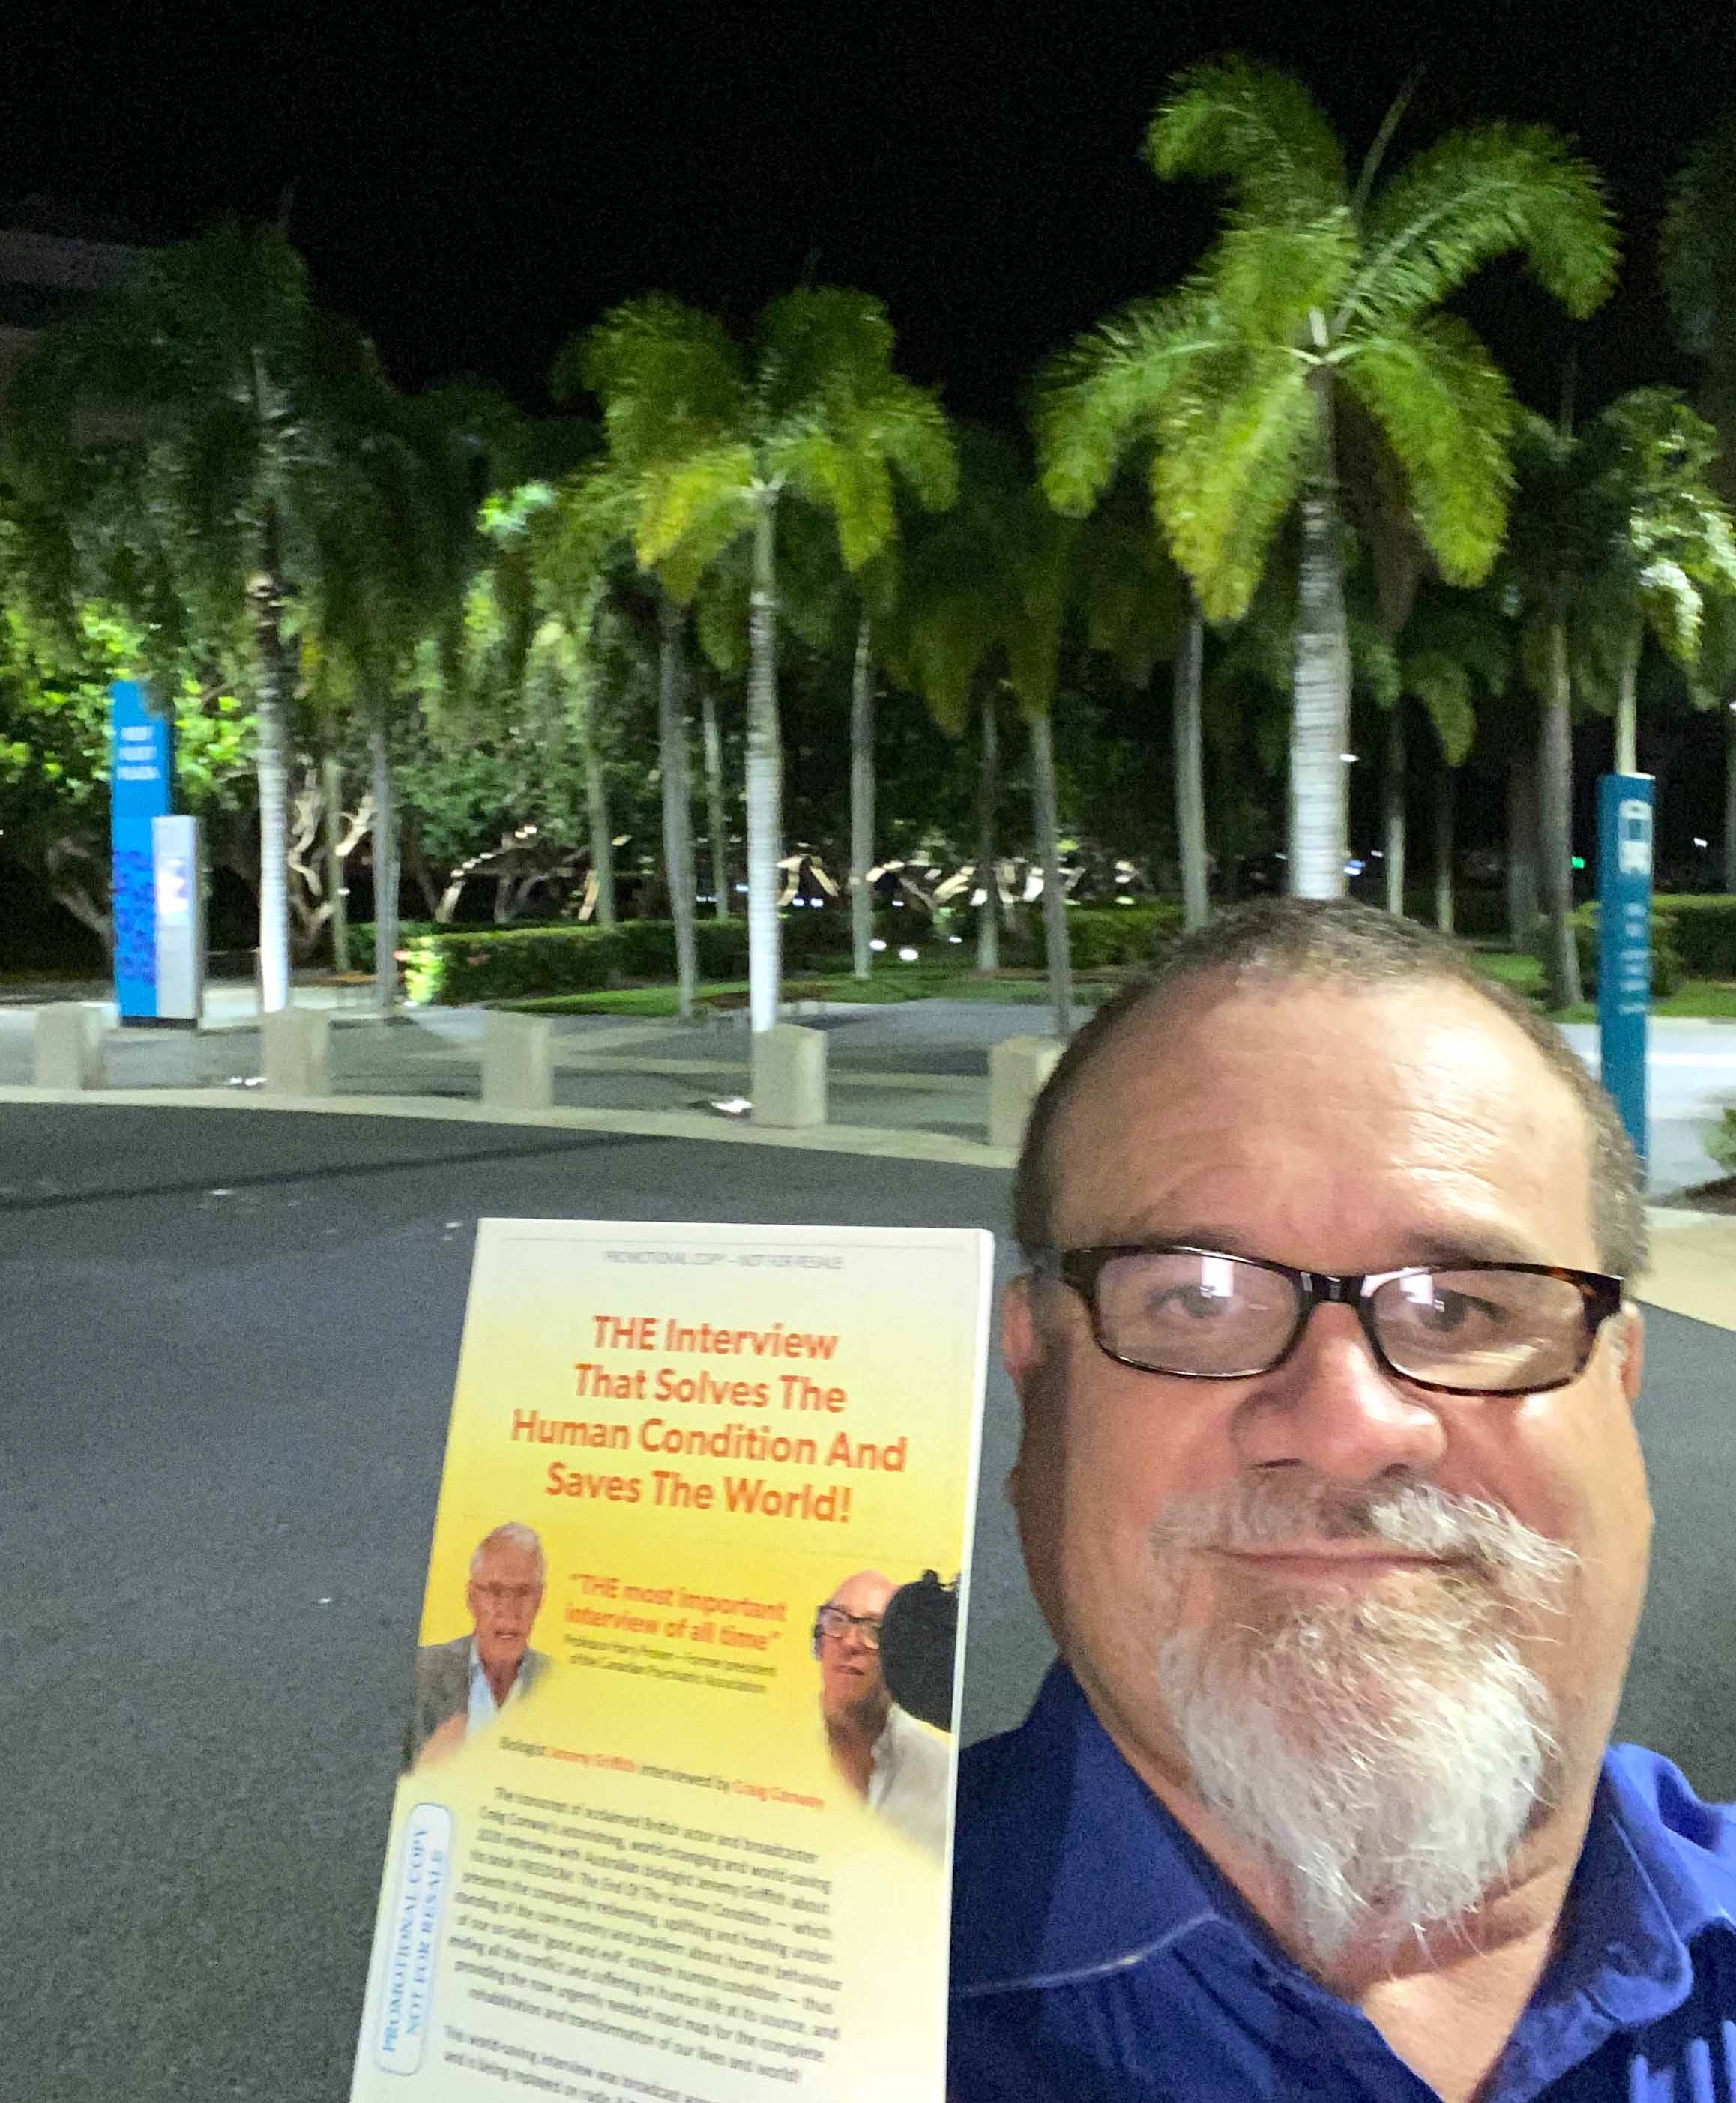 Joseph holding a copy of the book 'THE Interview' with palm trees lit up by lights in background